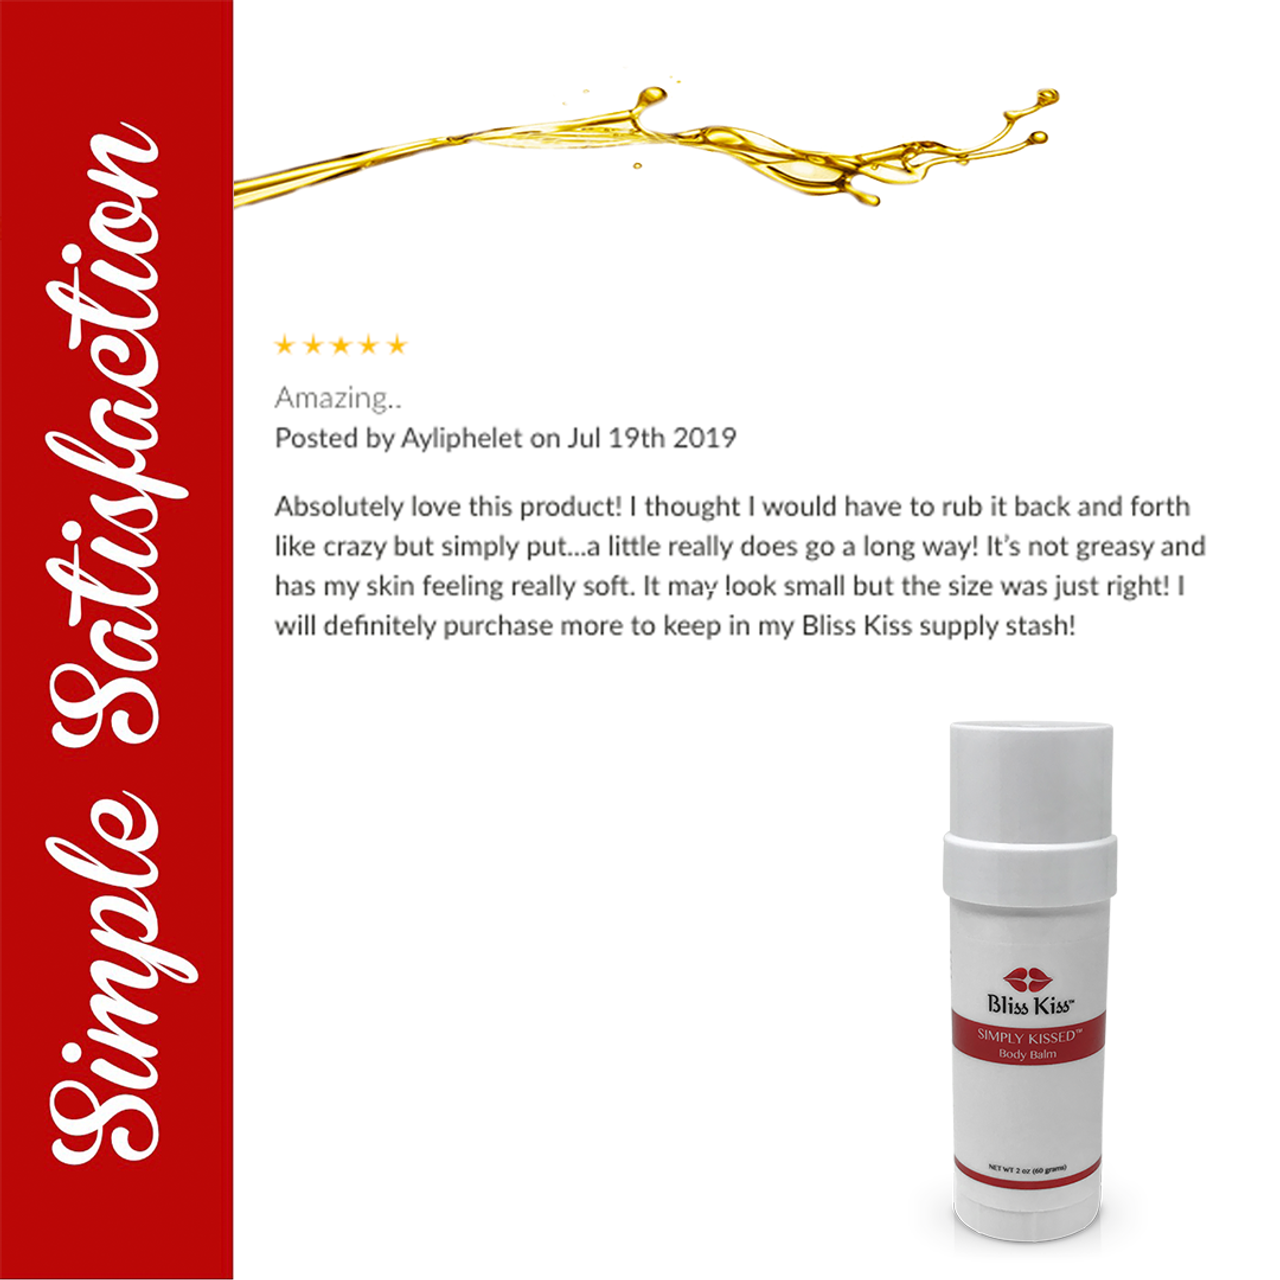 Simply Kissed™ Ultra Hydrating Body Balm